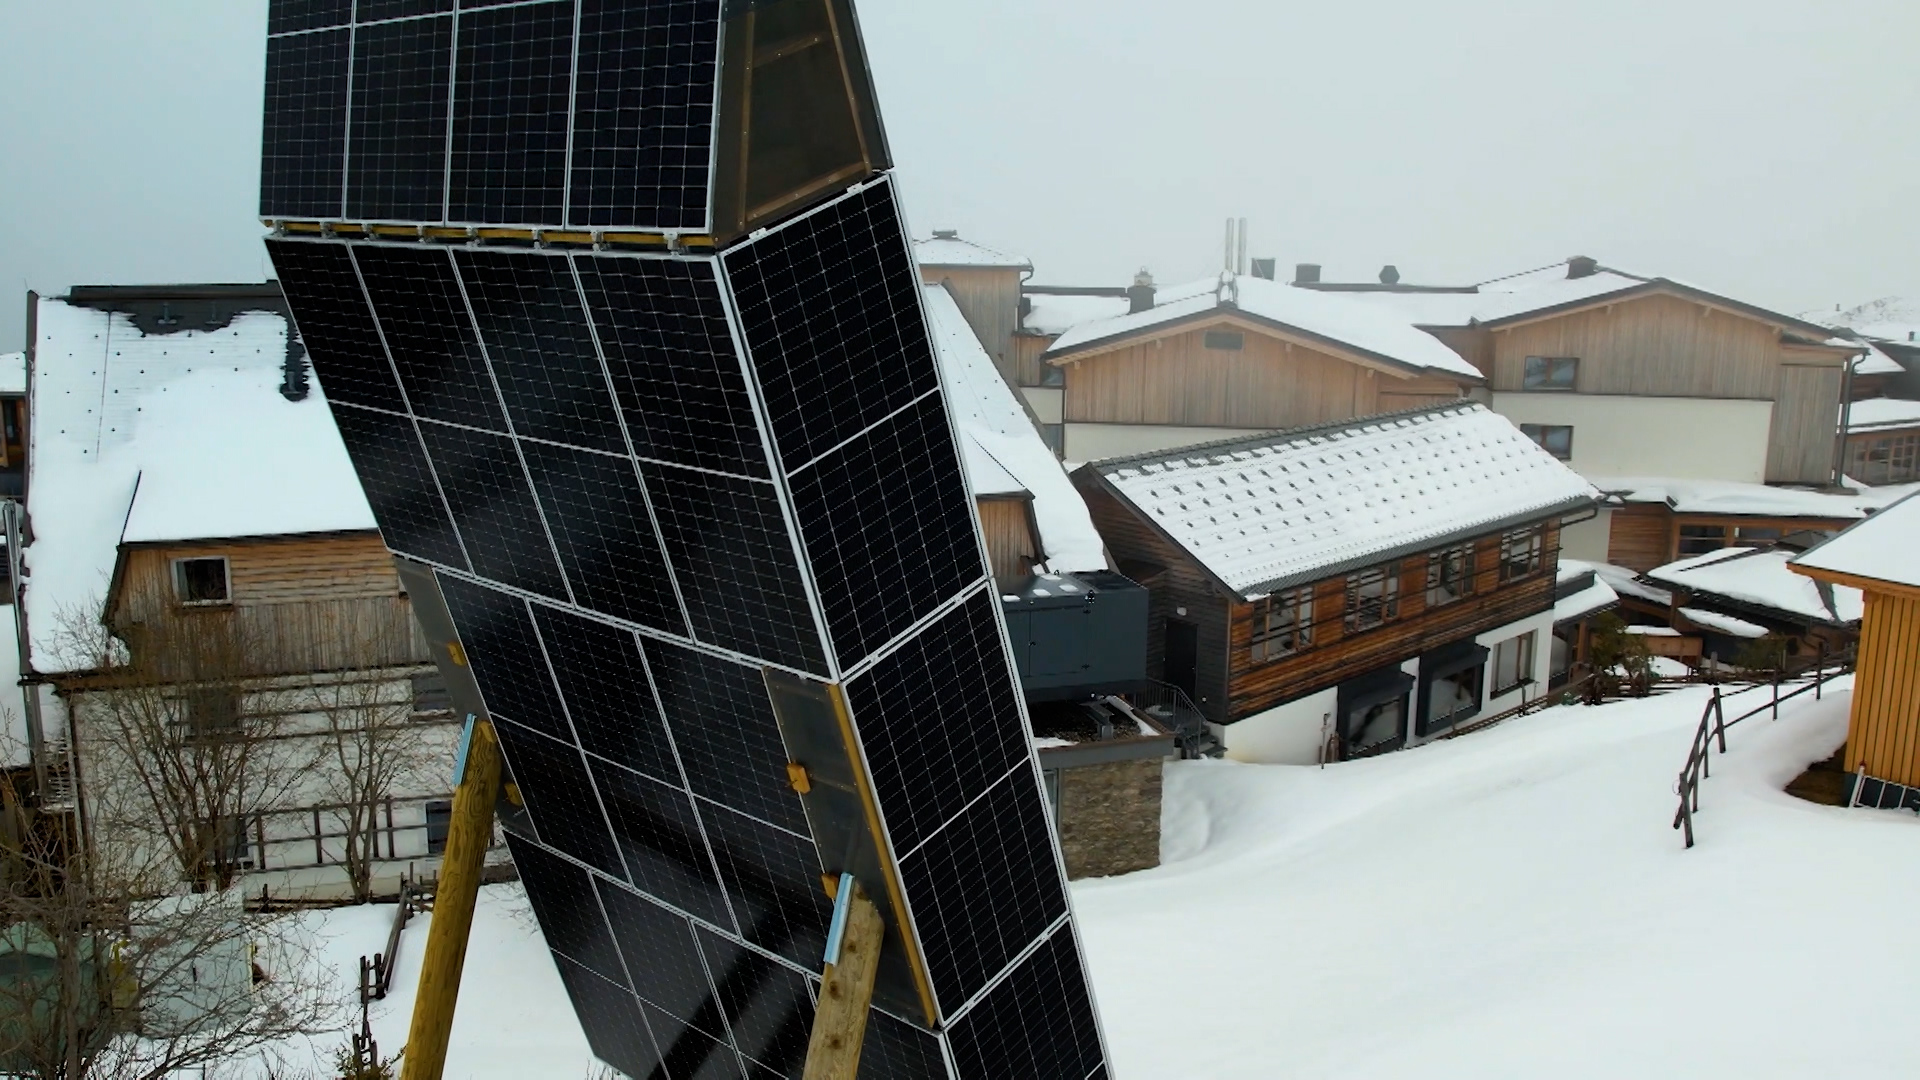 The Solar Poplar construction has panels on each side to also use the light reflection on the snow. /Gasser/CGTN